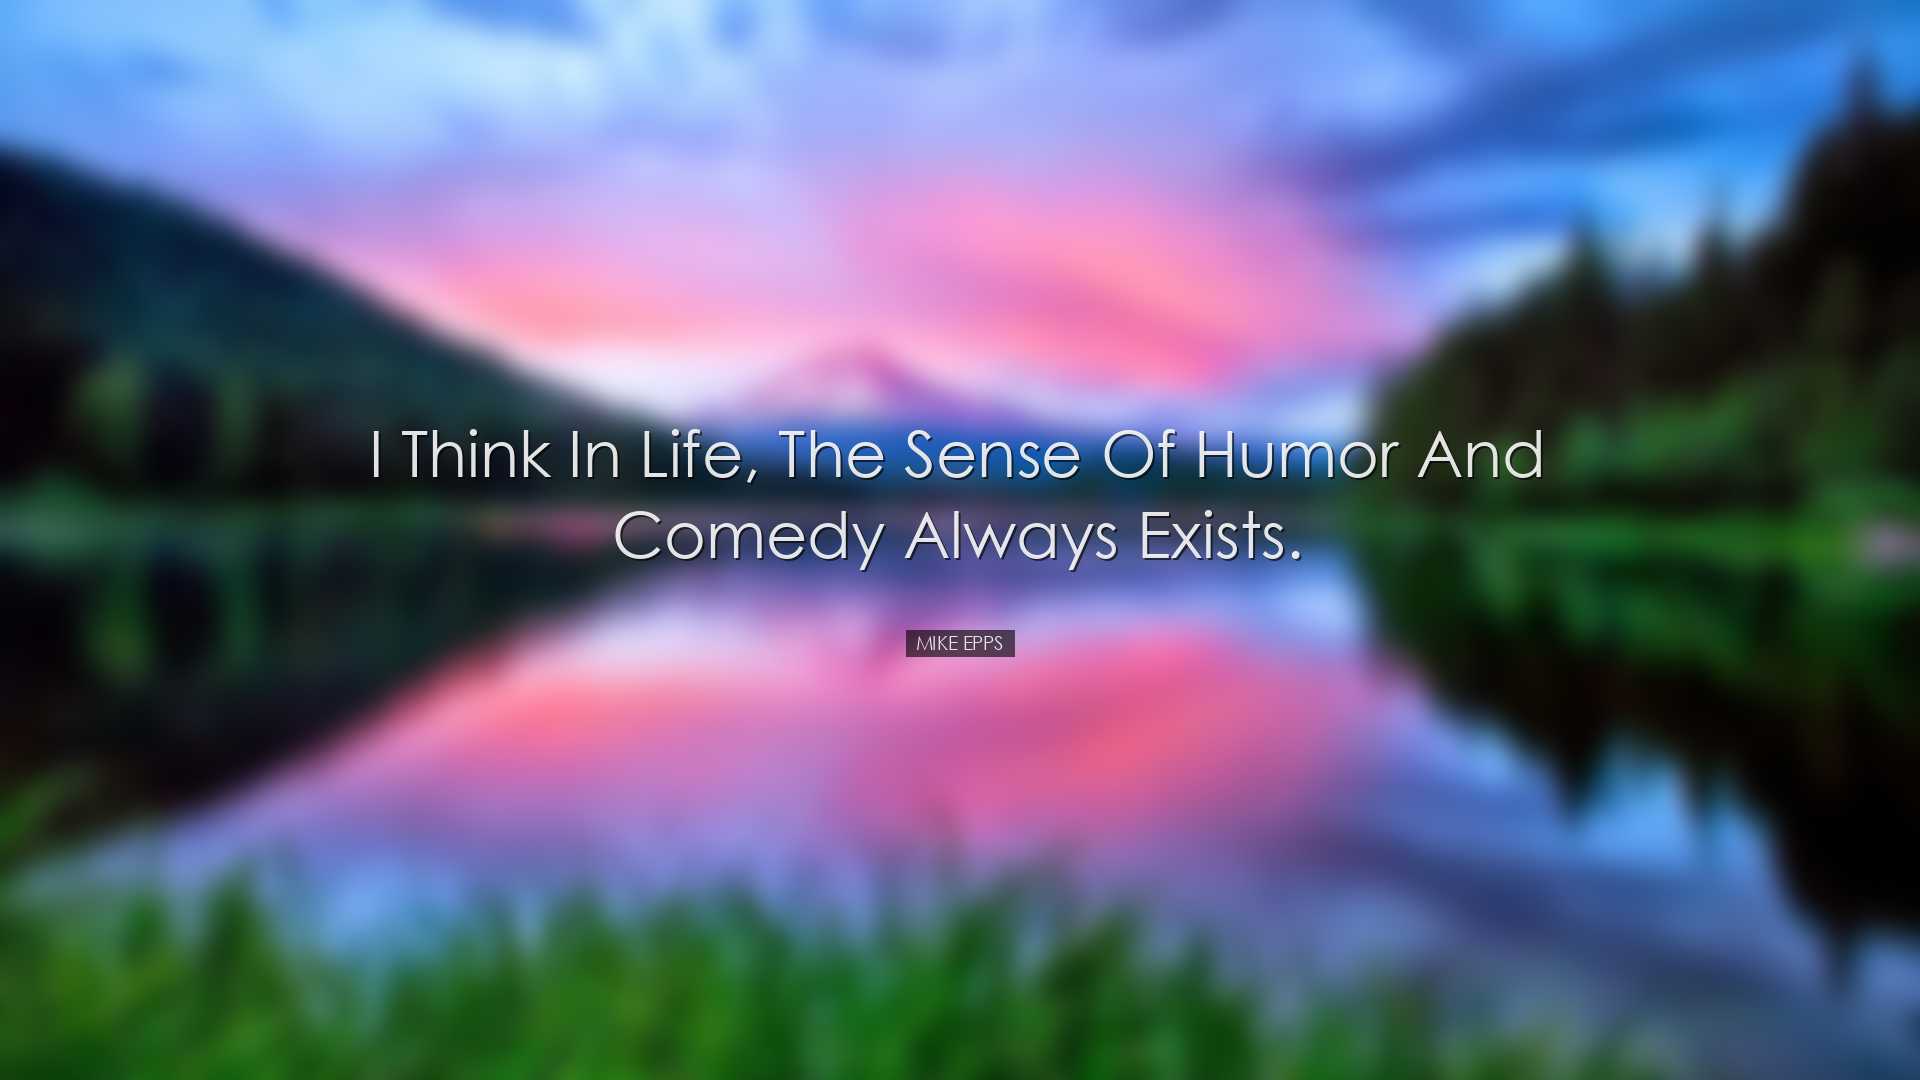 I think in life, the sense of humor and comedy always exists. - Mi